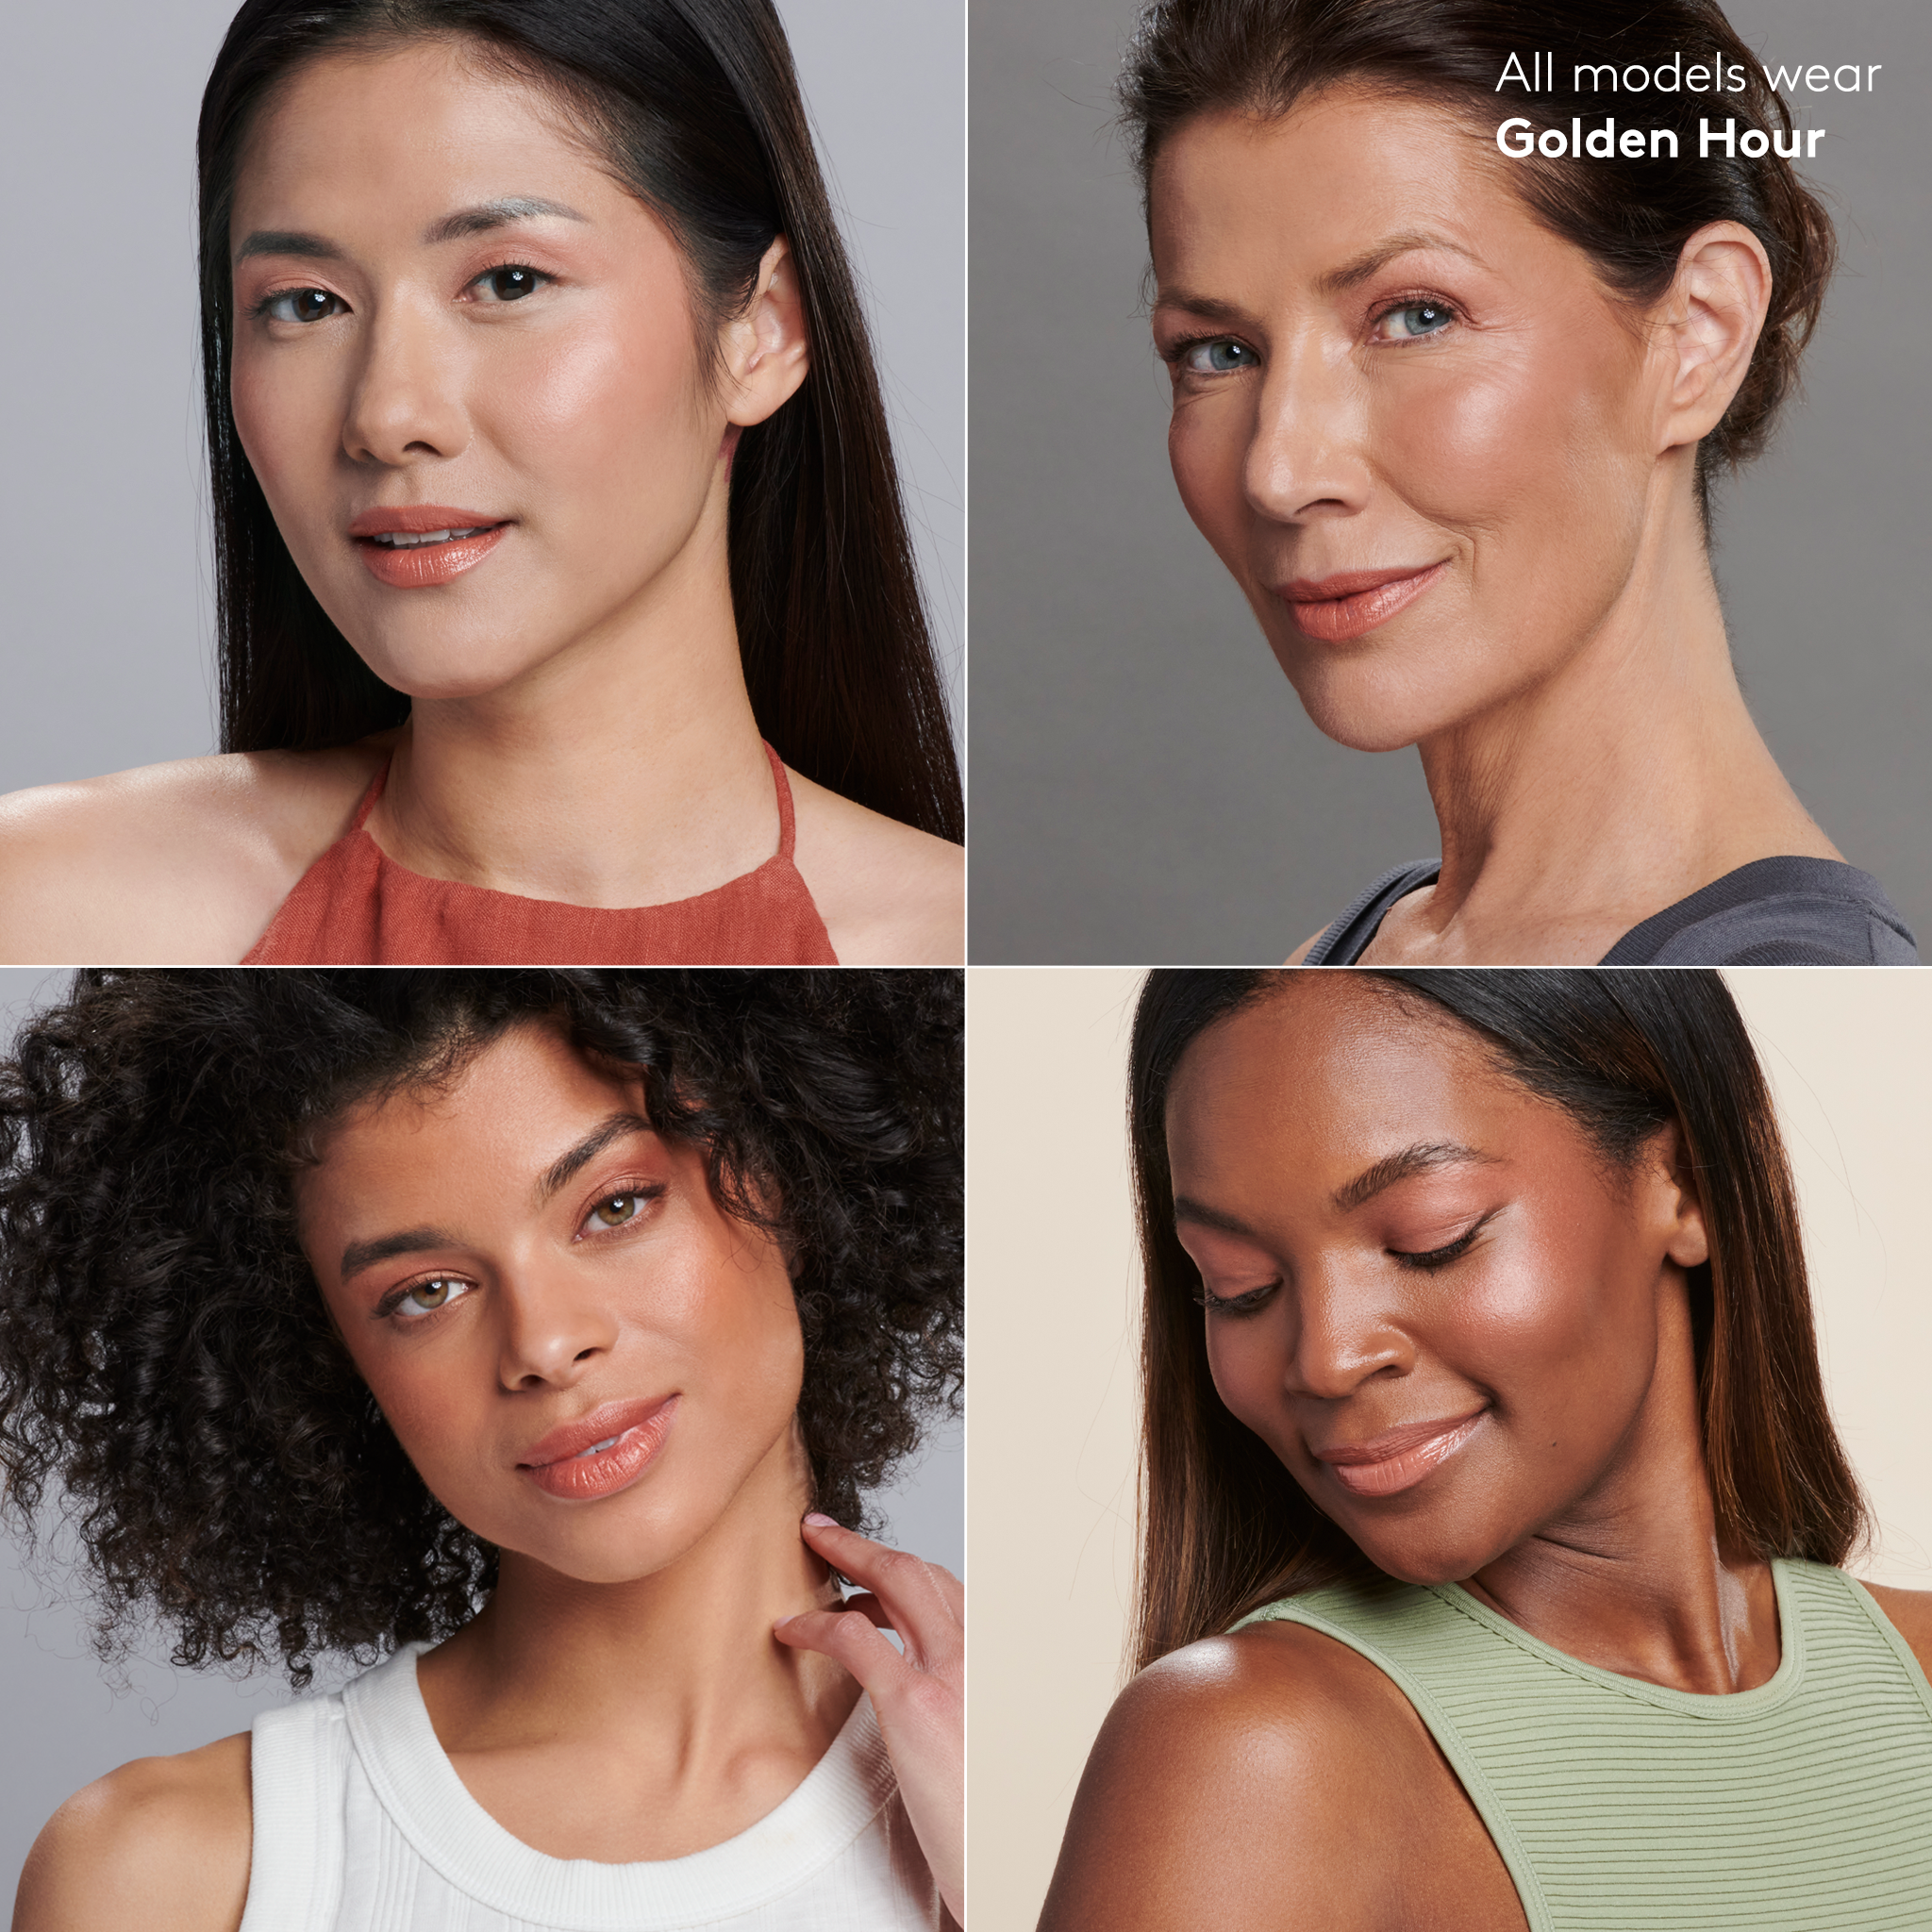 4 models of fair, medium, tan and deep skin tone wearing Golden Hour shade of the Sunforgettable® Total Protection™ Color Balm SPF 50 Endless Sunset Collection || all